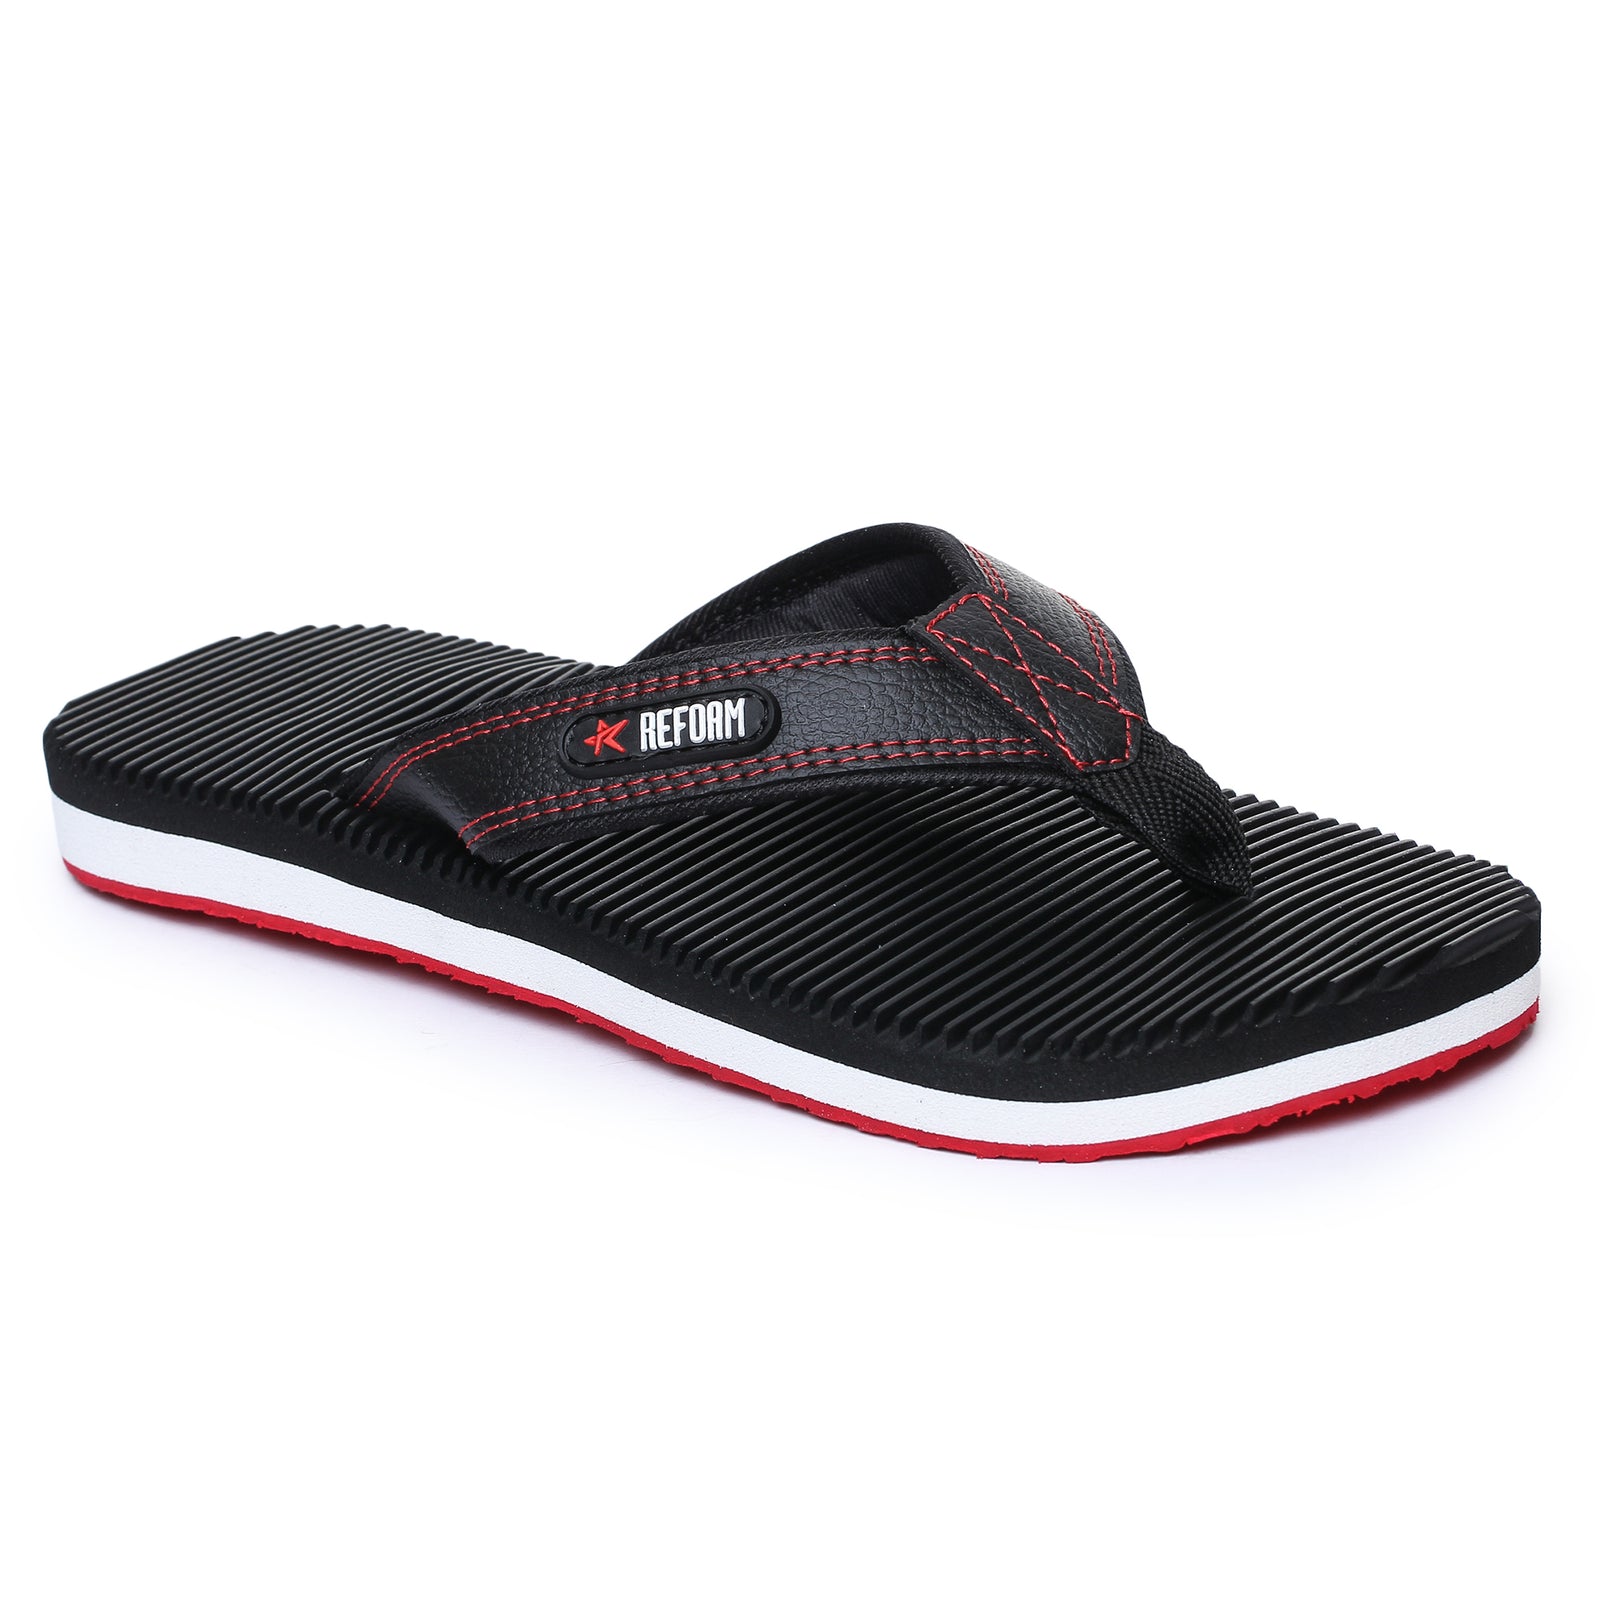 Black Solid Fabric Slip On Casual Slippers For Men